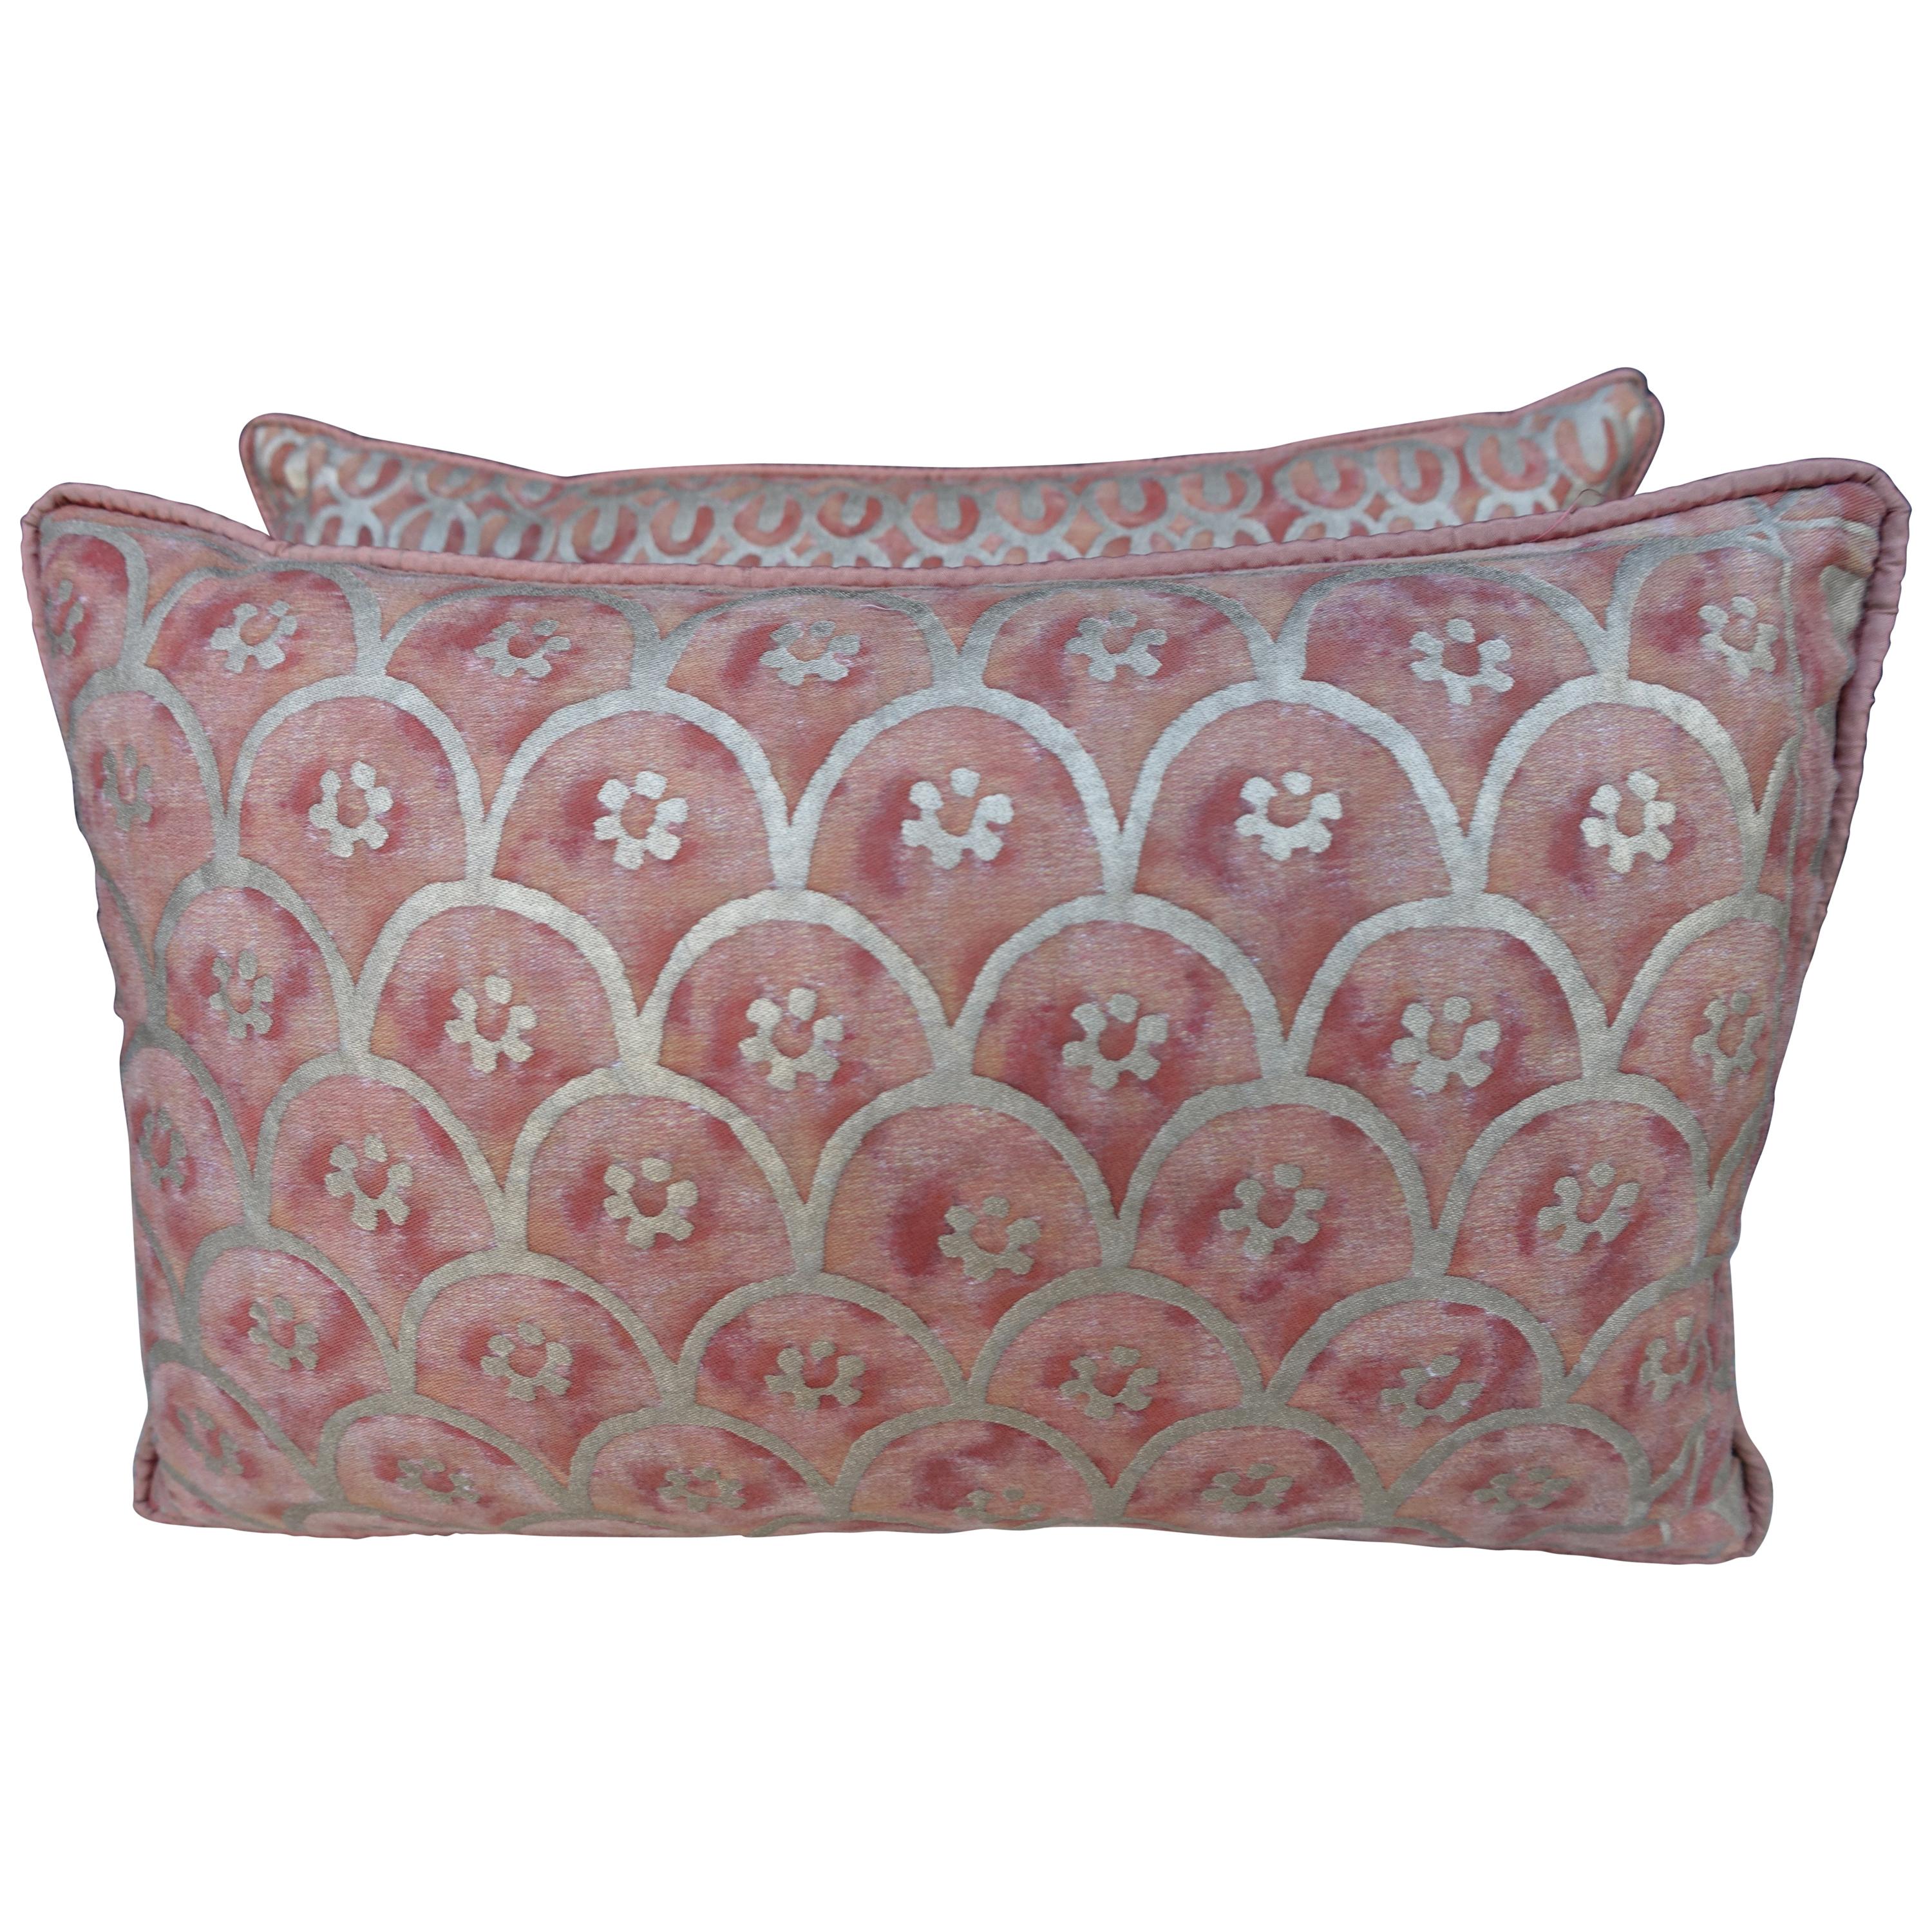 Pair of Blush and Silvery Gold Fortuny Pillows